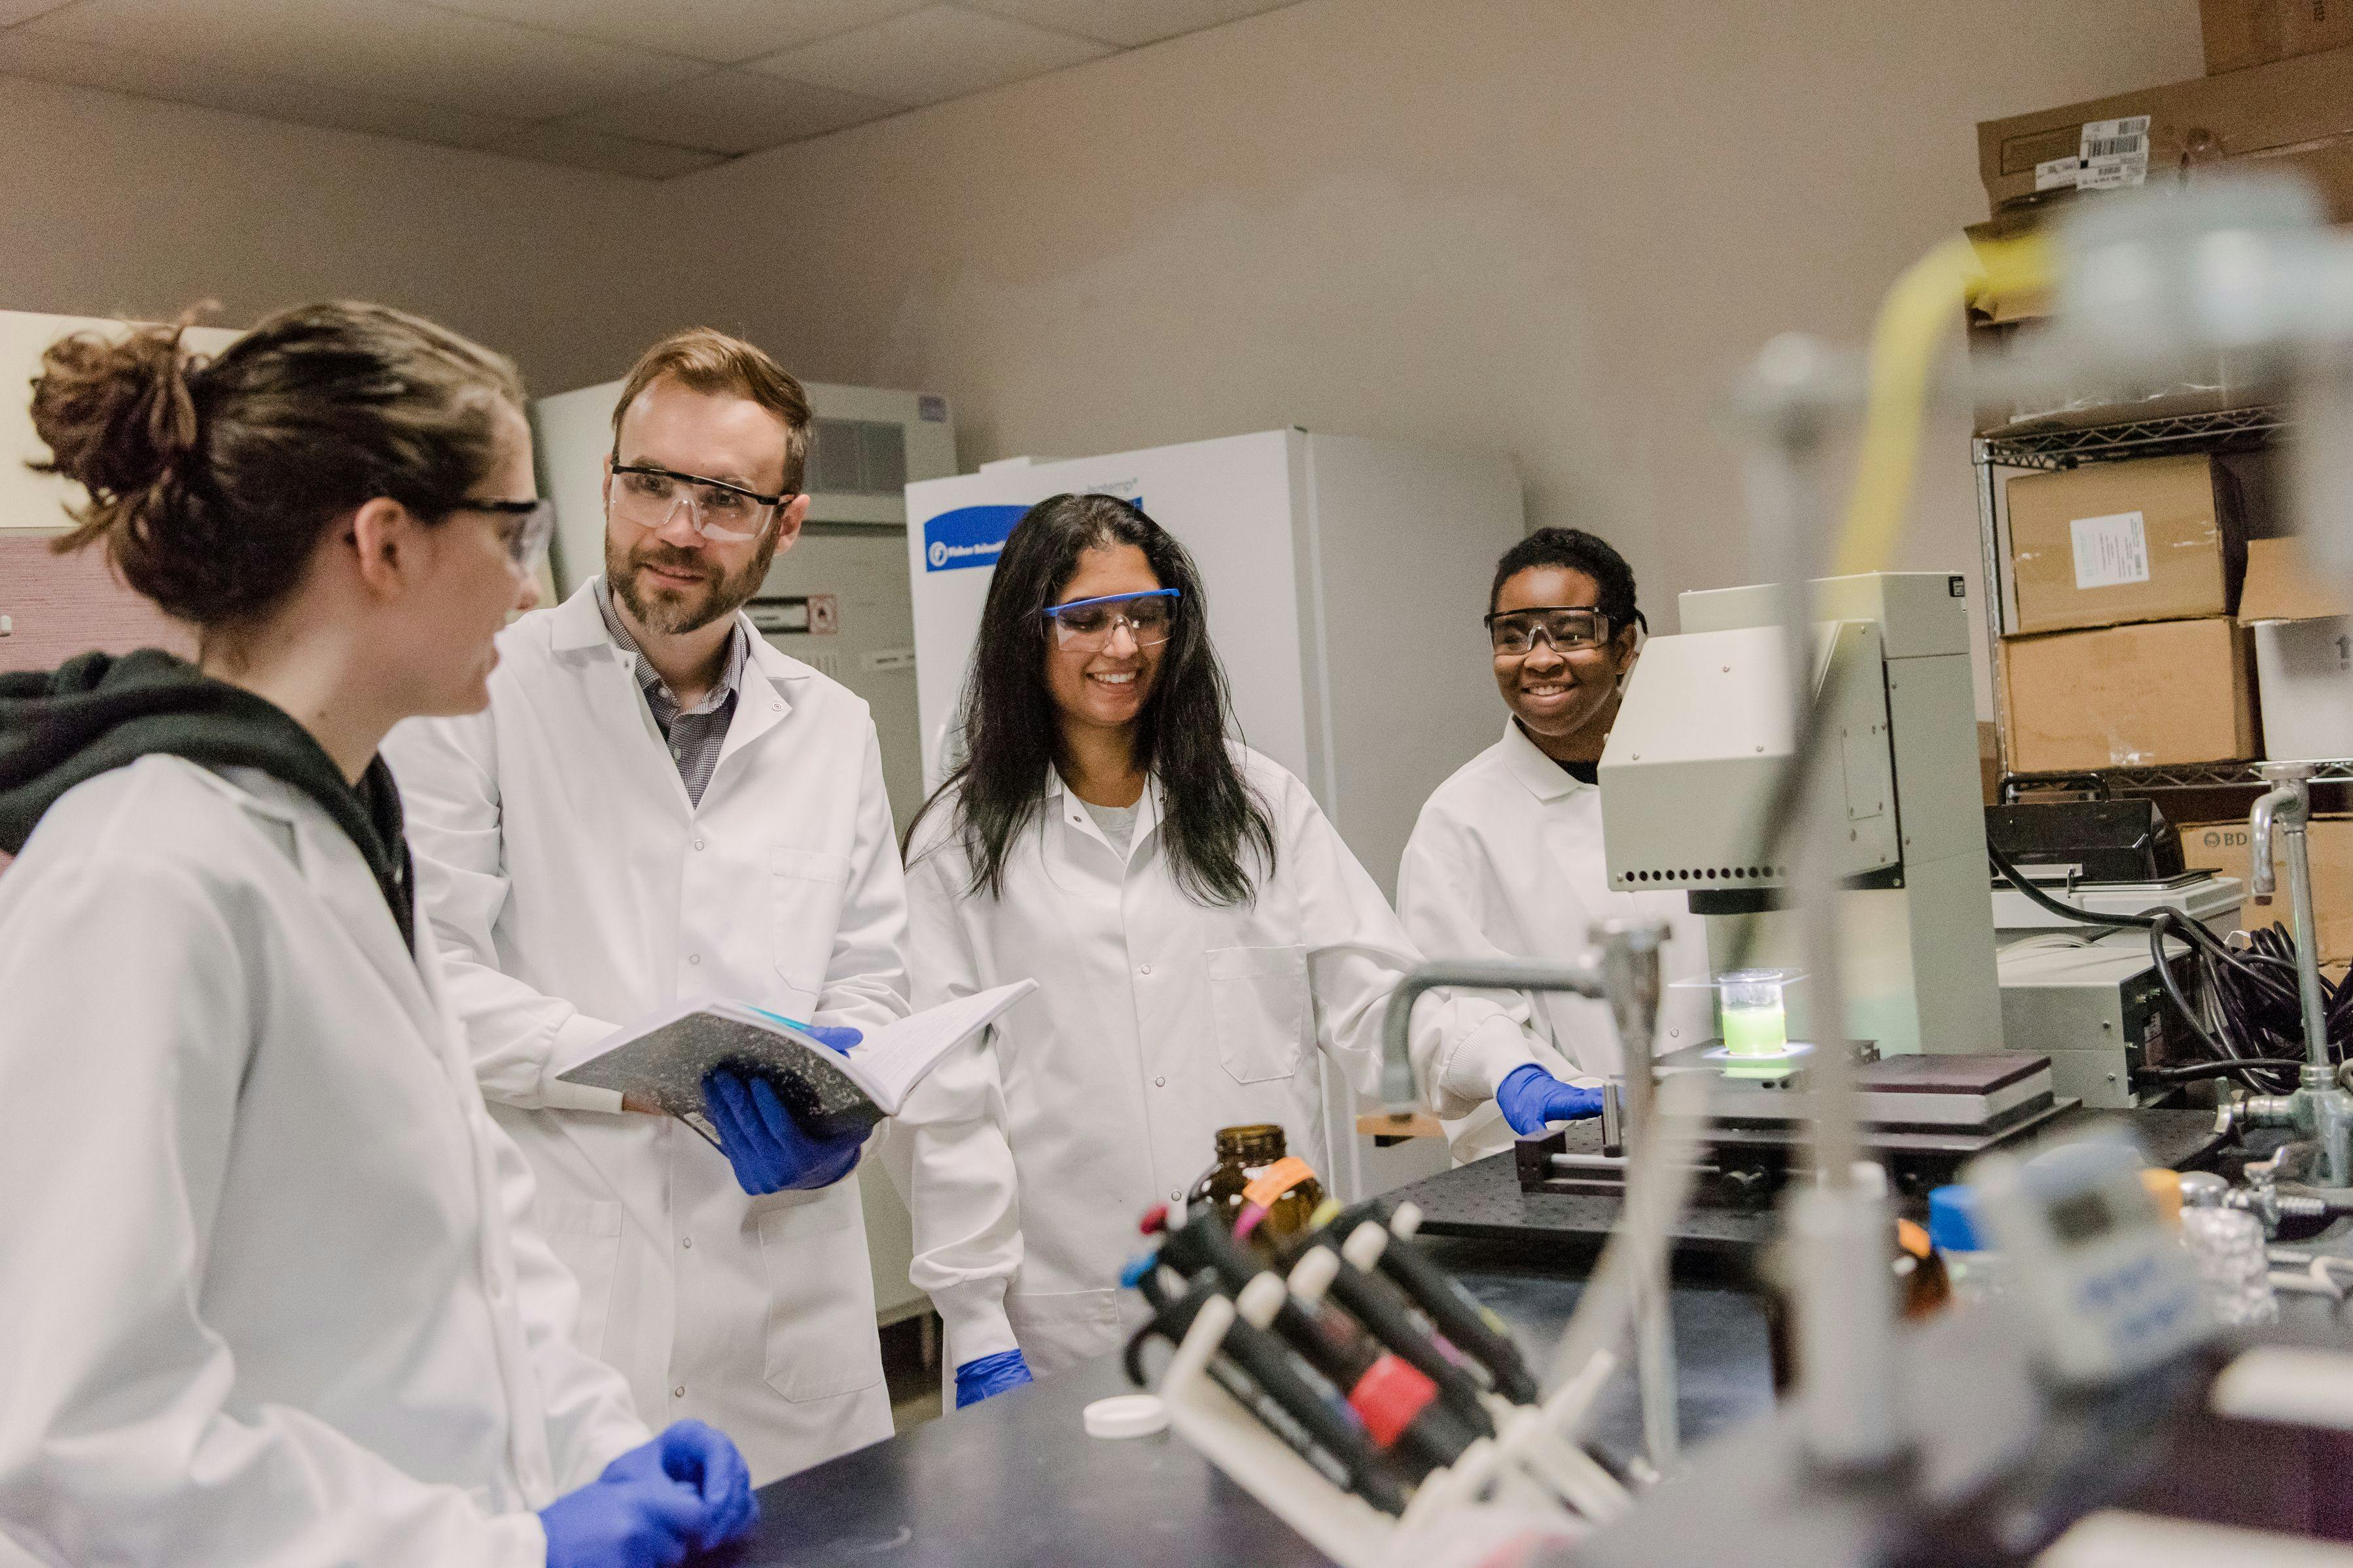 Blaney (second from left) with undergraduate researchers Bridget Anger (left) and Lauren Harris (right) and PhD candidate Mamatha Hopanna (second from right) discuss photochemical treatment of antibiotics in water. Photo Credit: © Lee Blaney